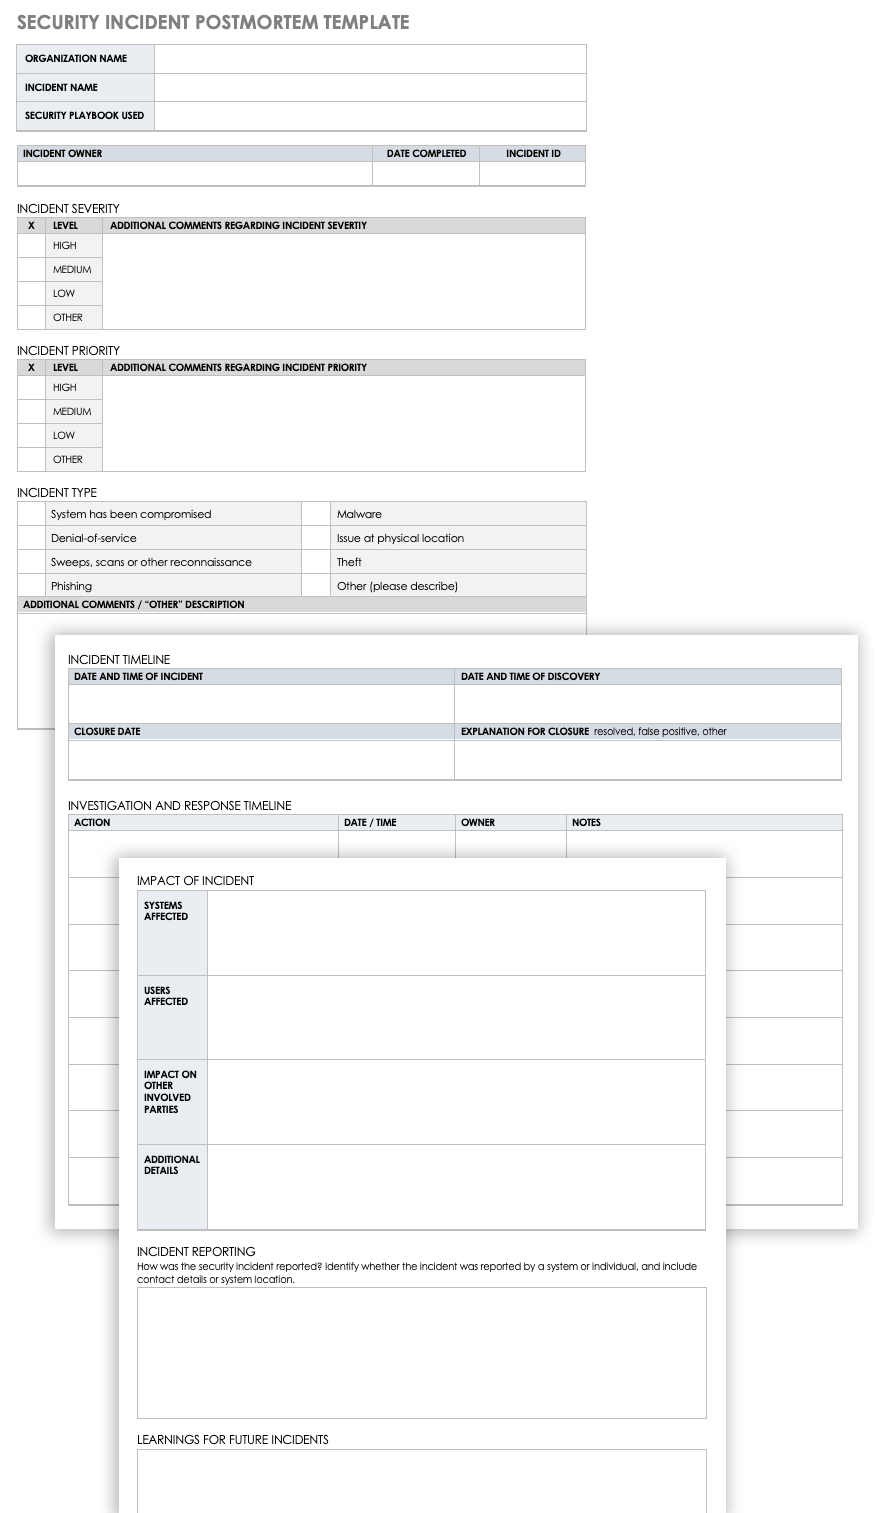 Free IT Incident Postmortem Templates  Smartshee With Regard To Serious Incident Report Template